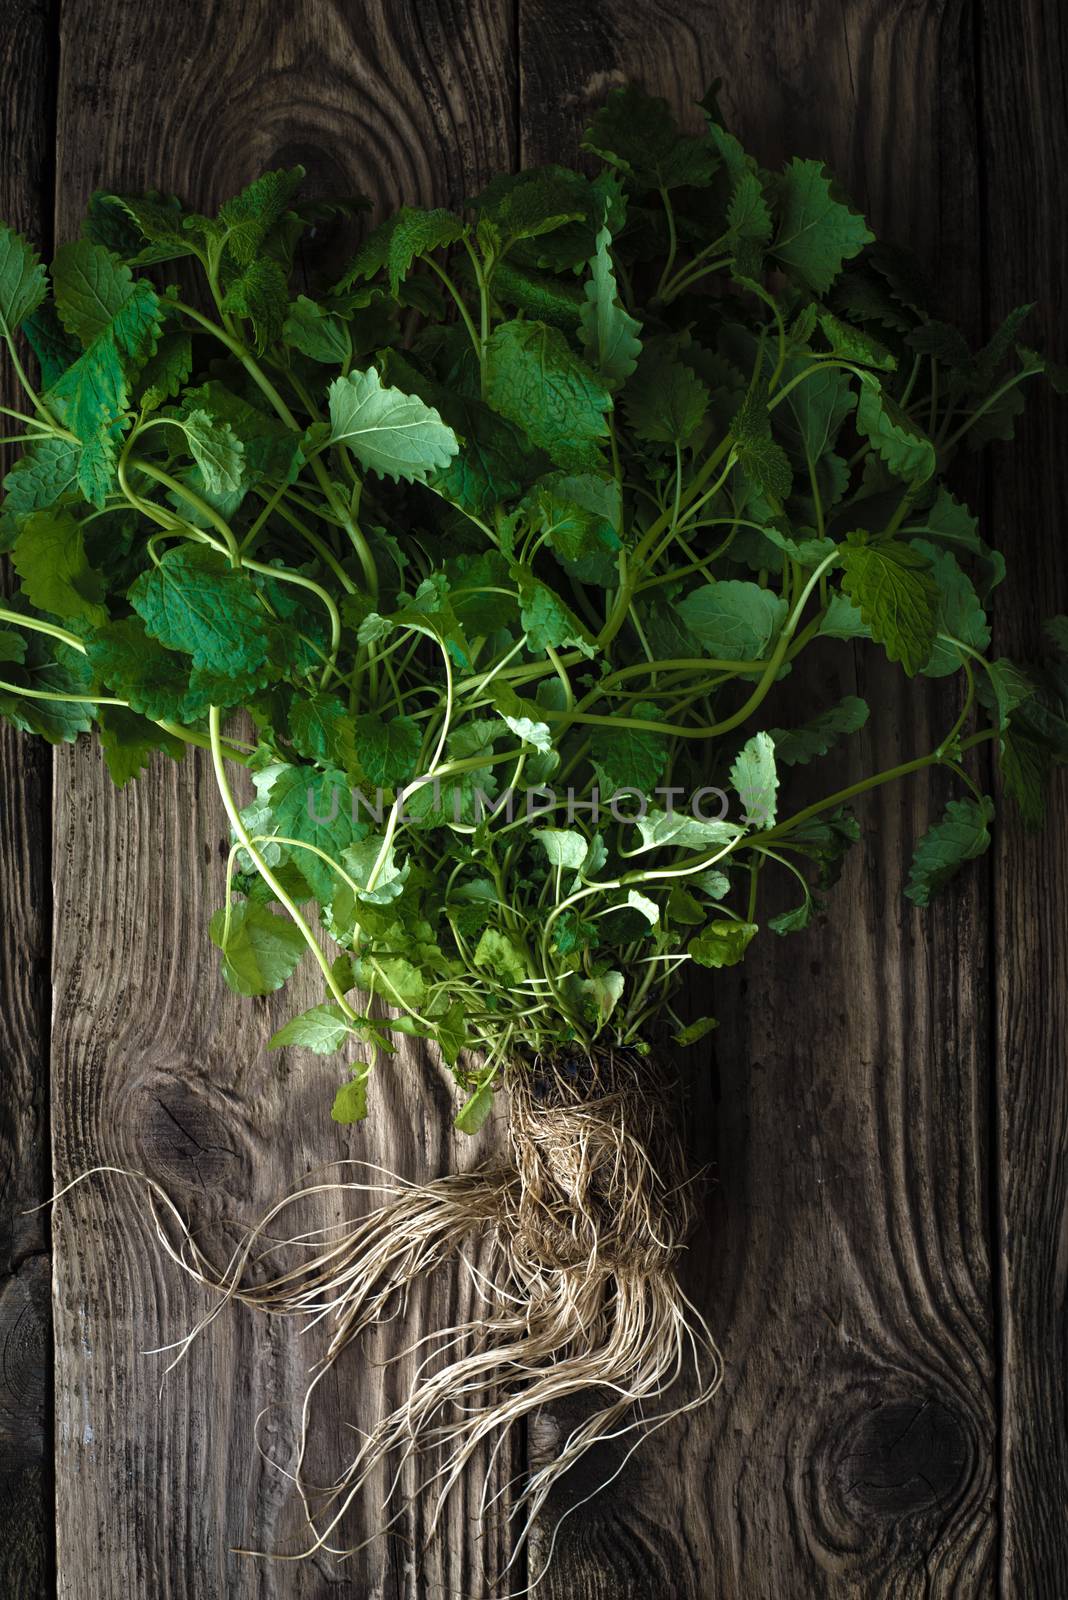 Green mint with roots on a wooden table by Deniskarpenkov